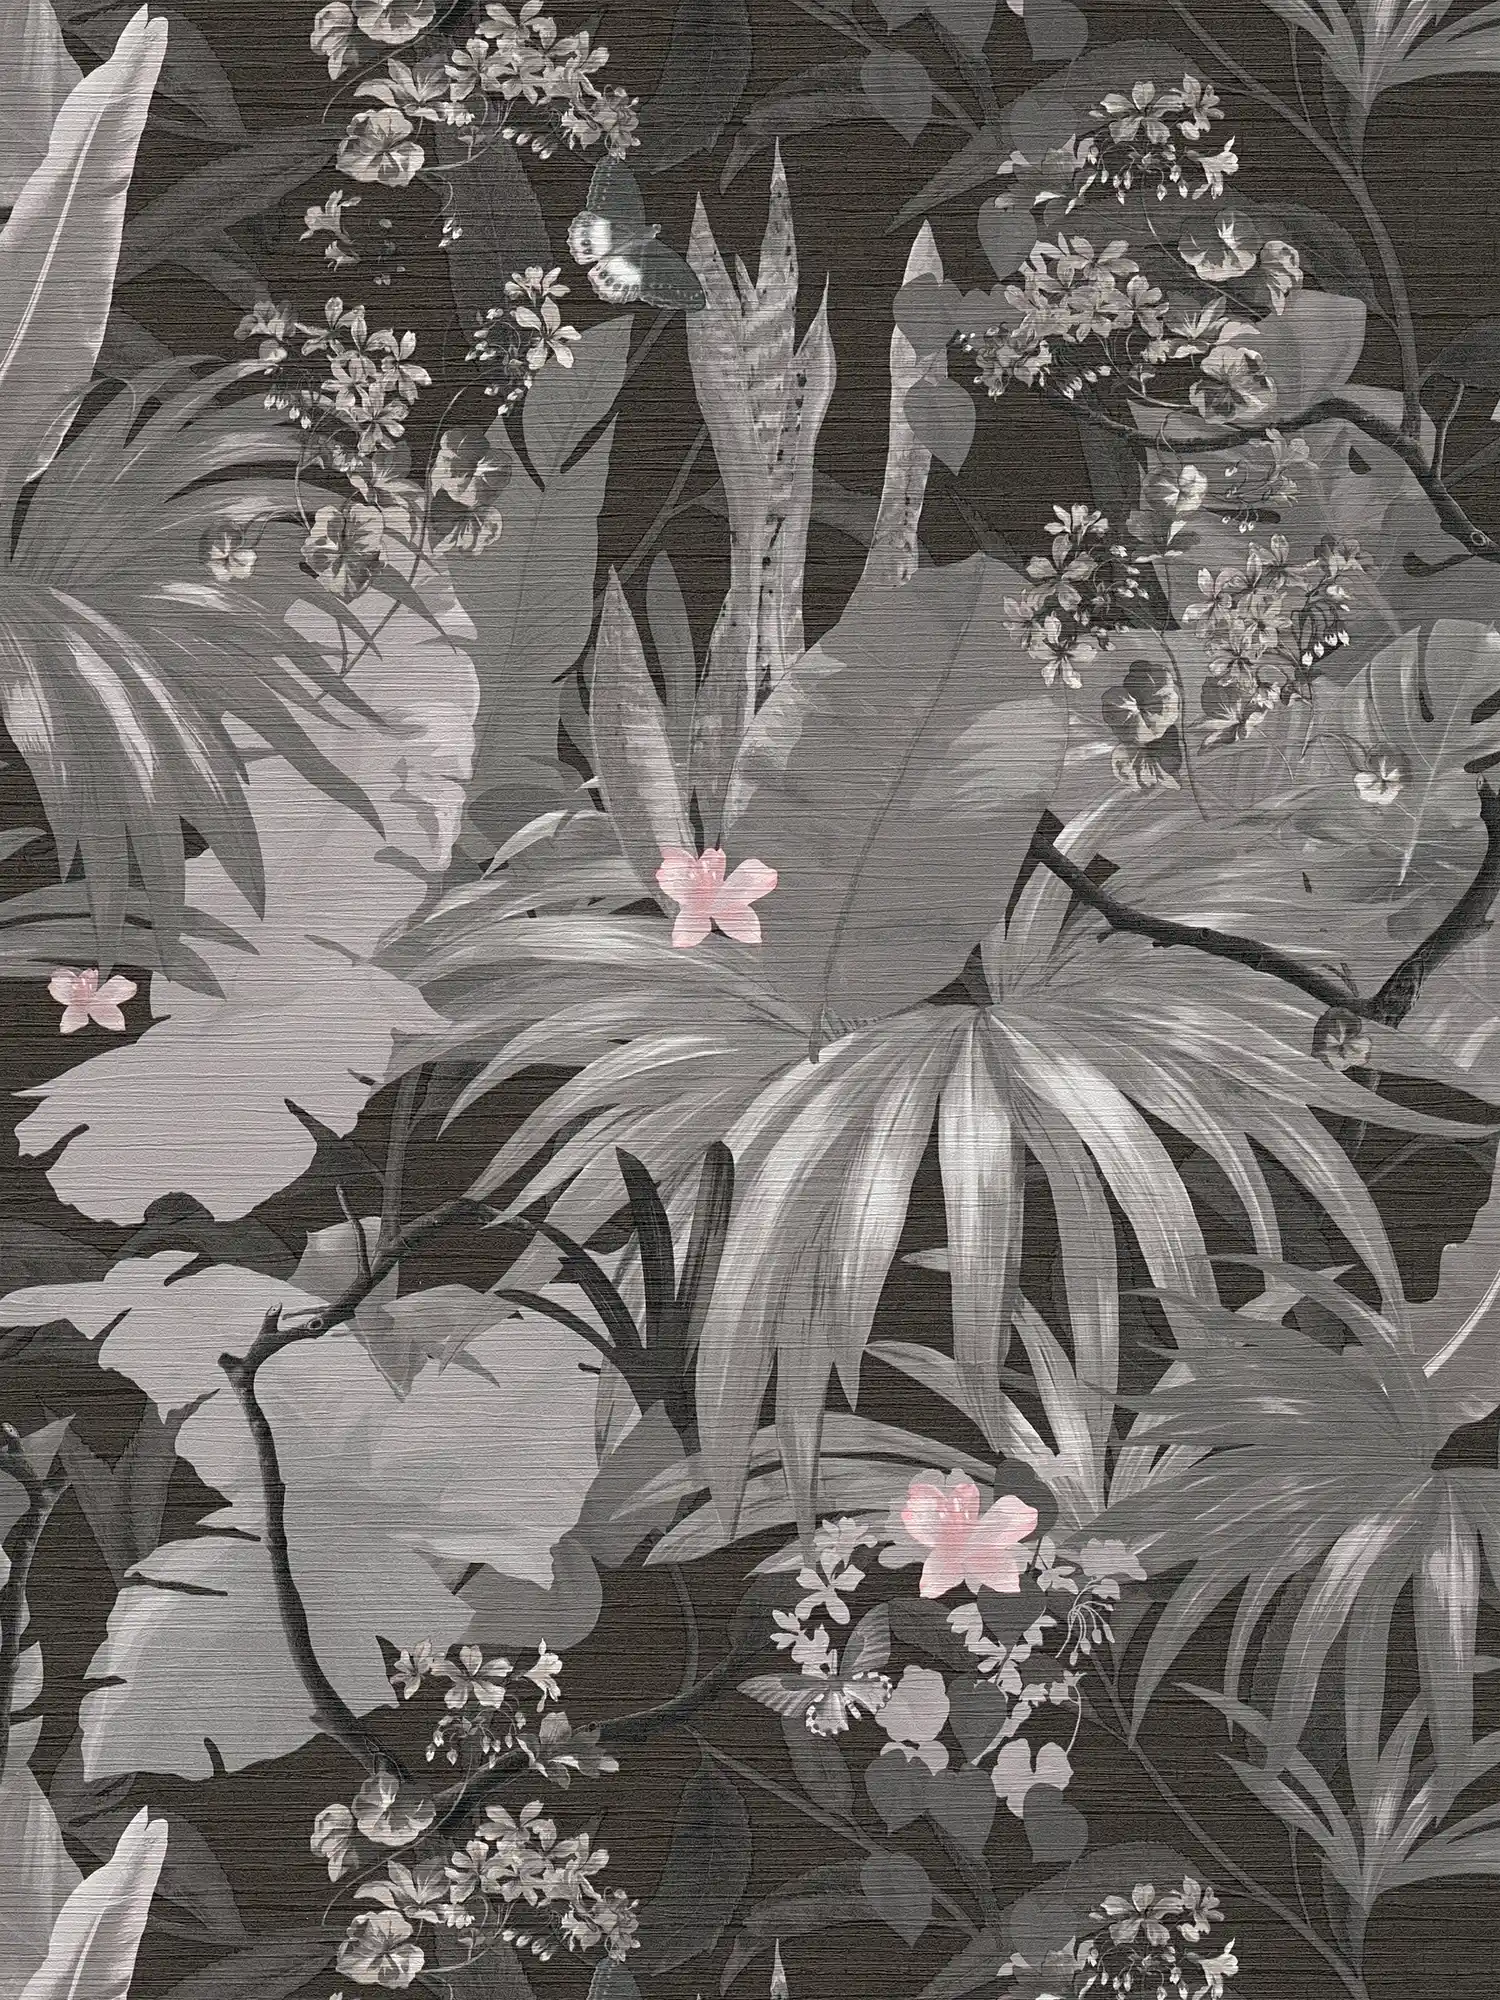             Jungle look wallpaper with nature design - grey, pink
        